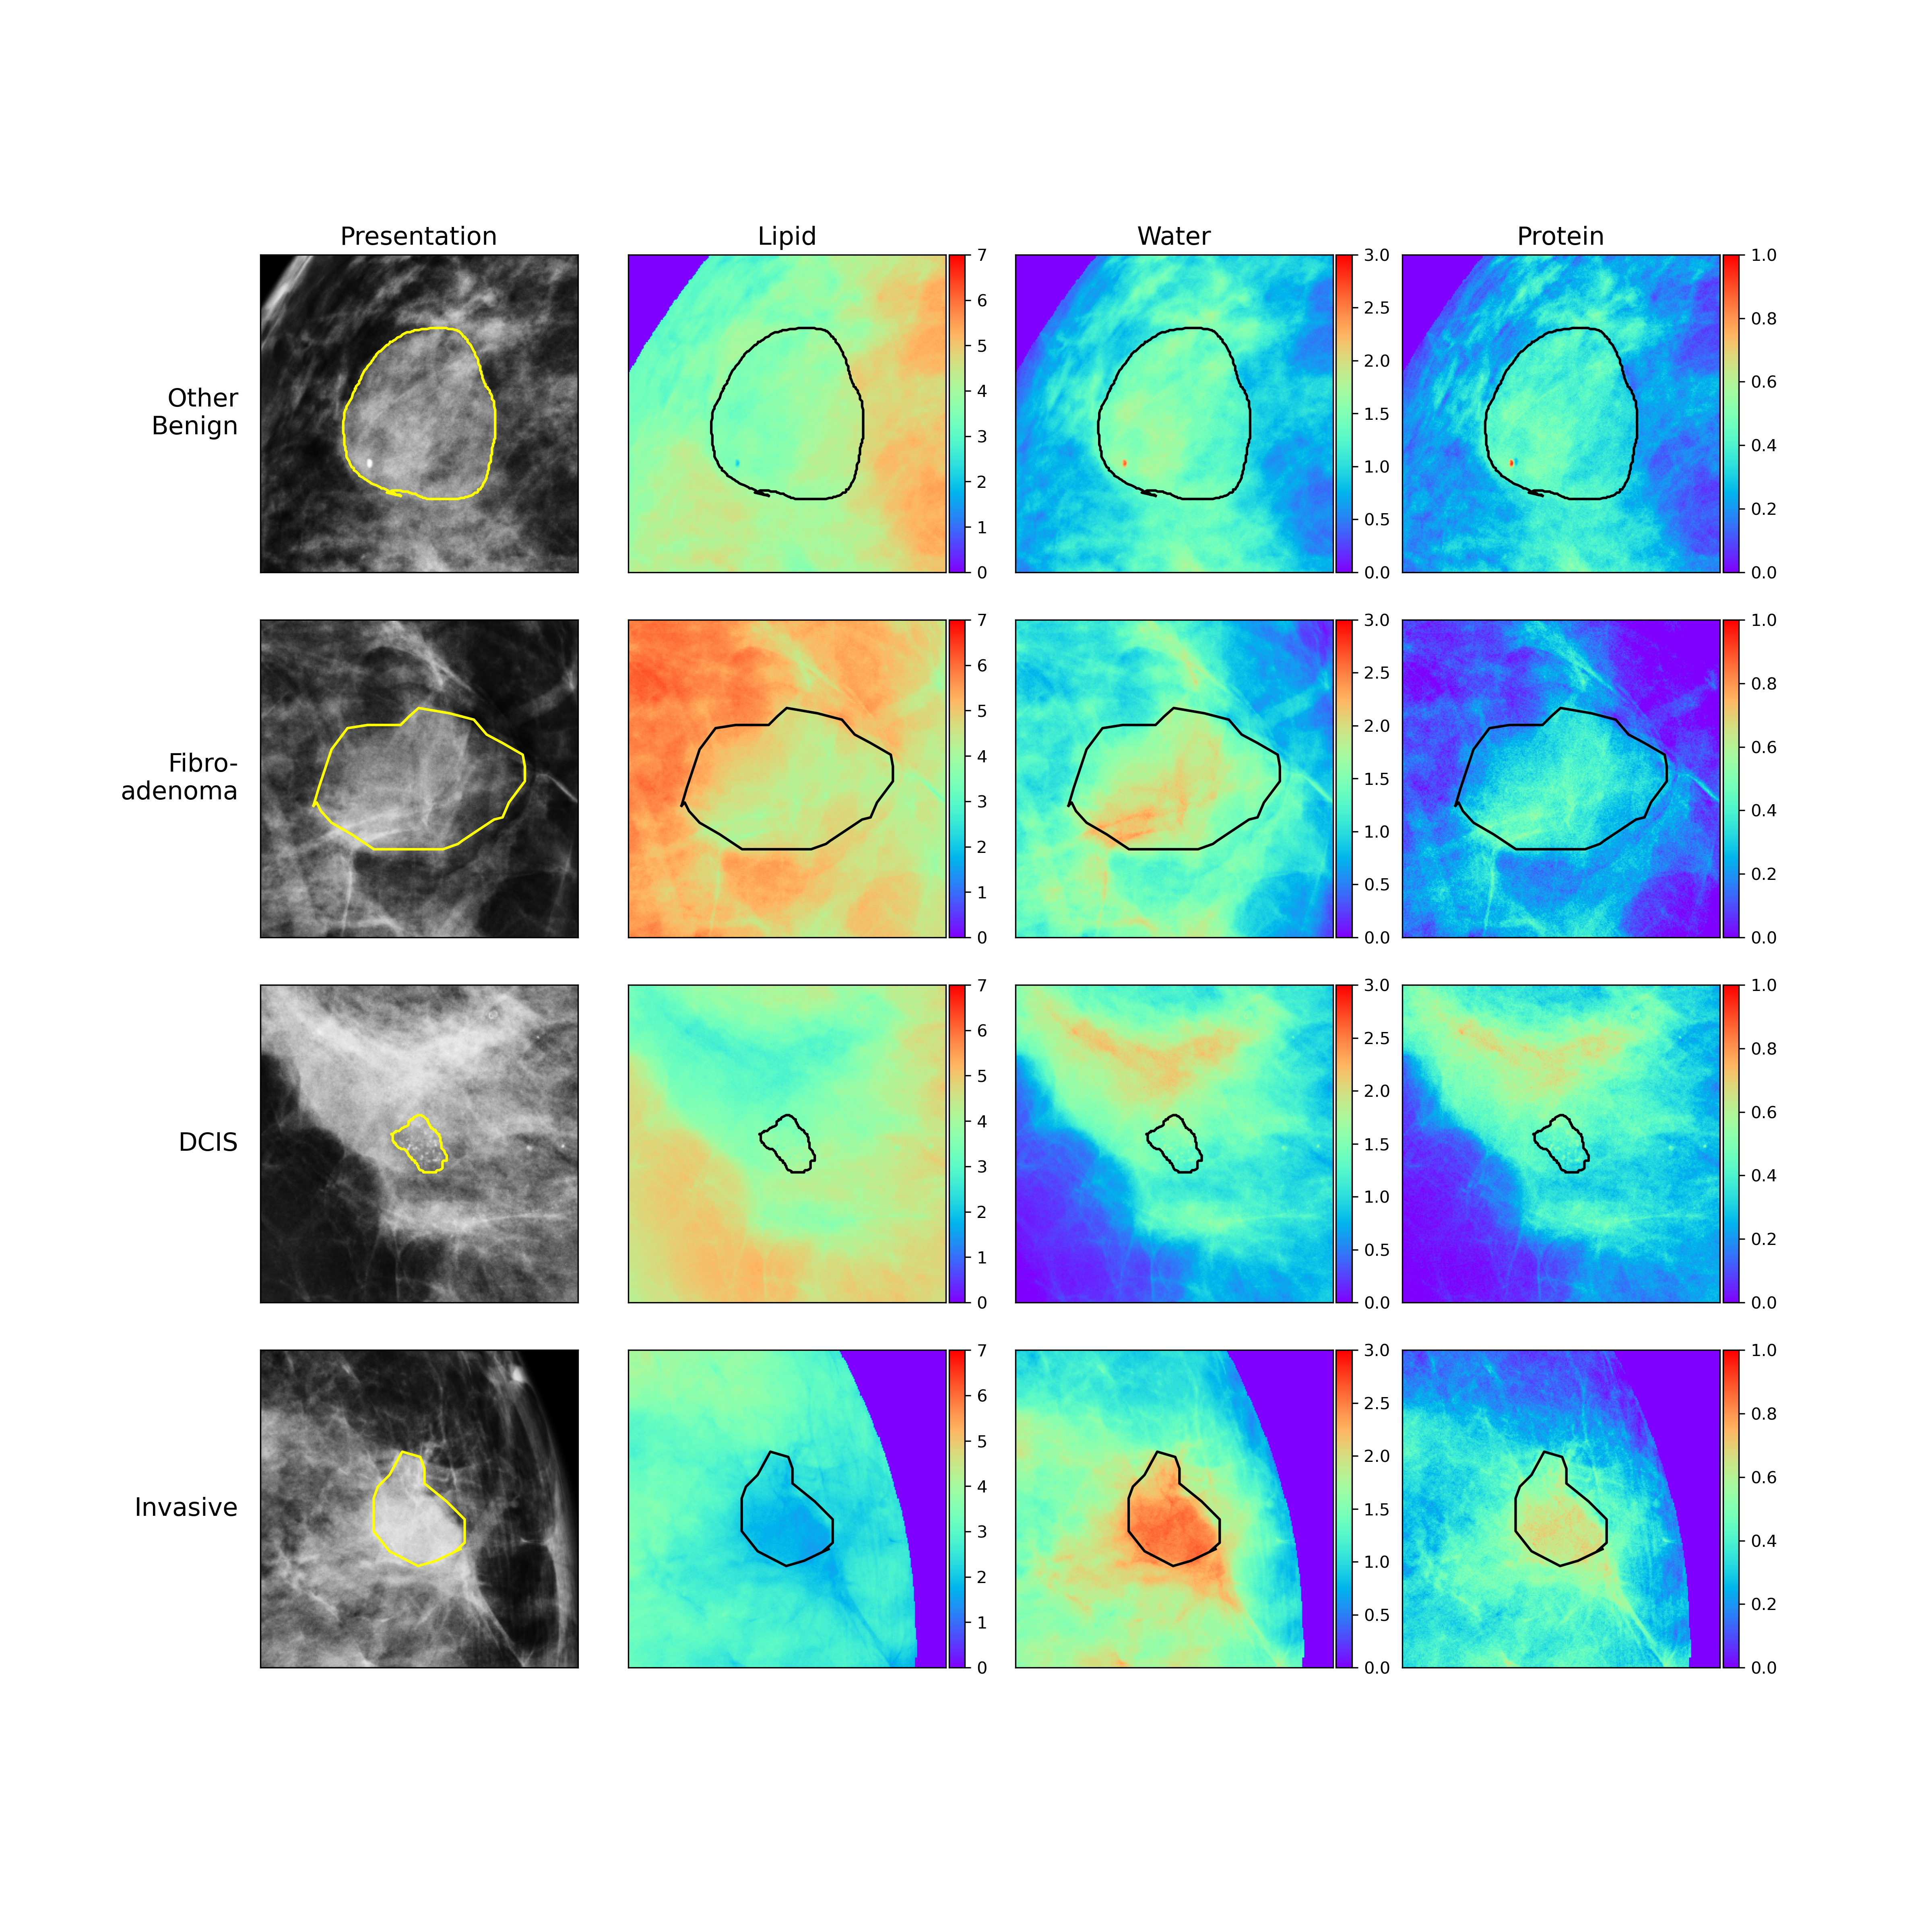 Compositional Imaging with Artificial Intelligence to Improve Breast Cancer Detection